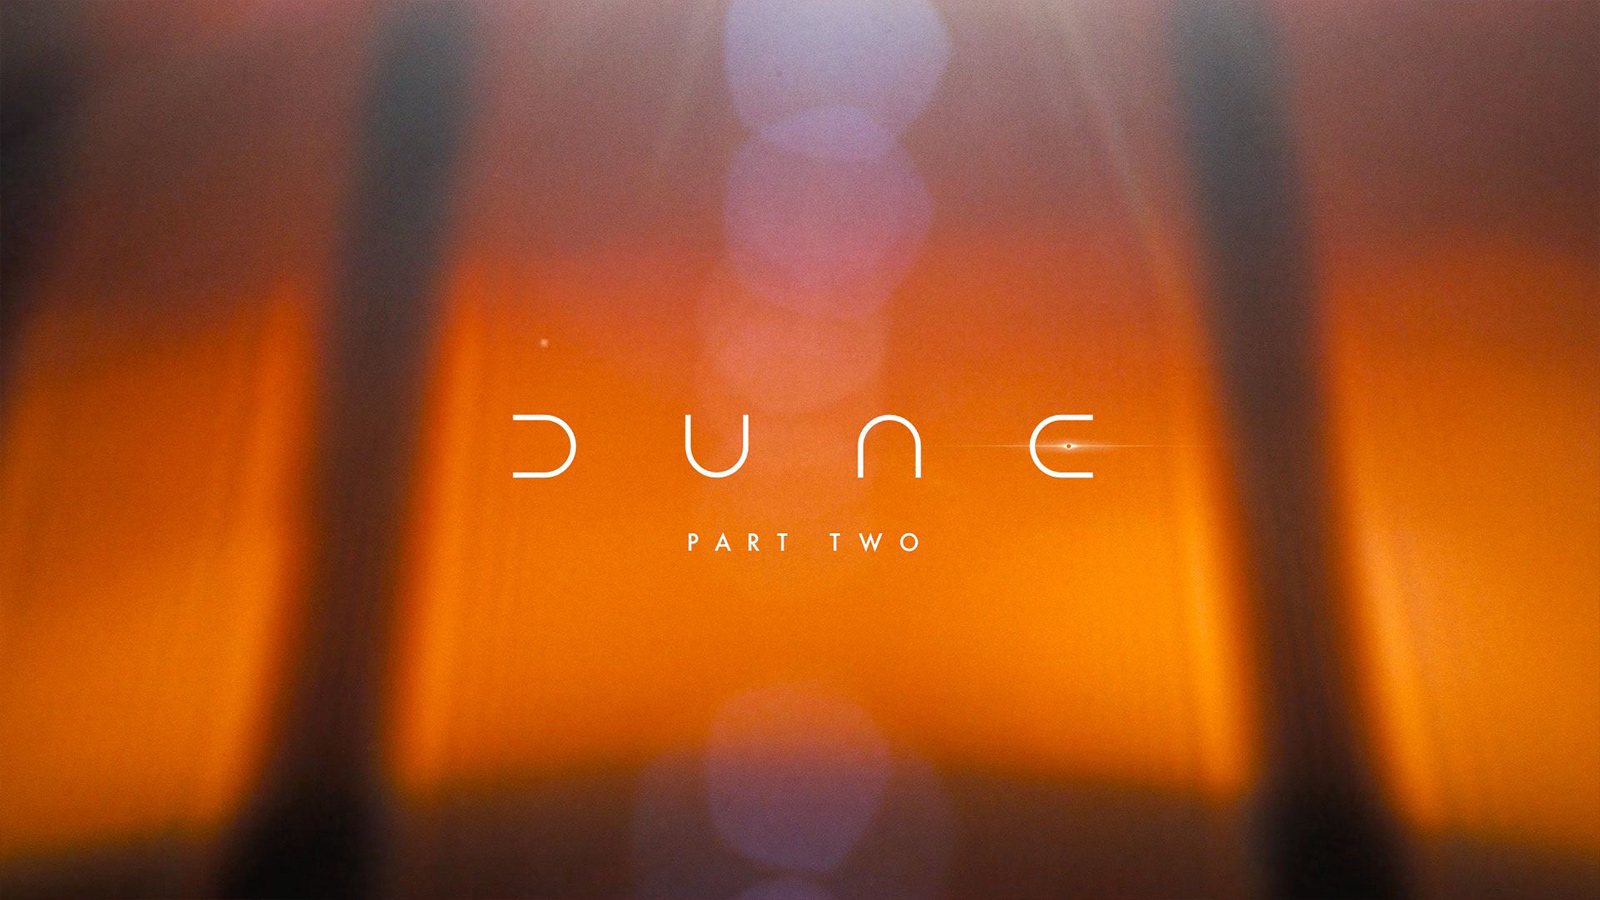 'Dune' Part Two